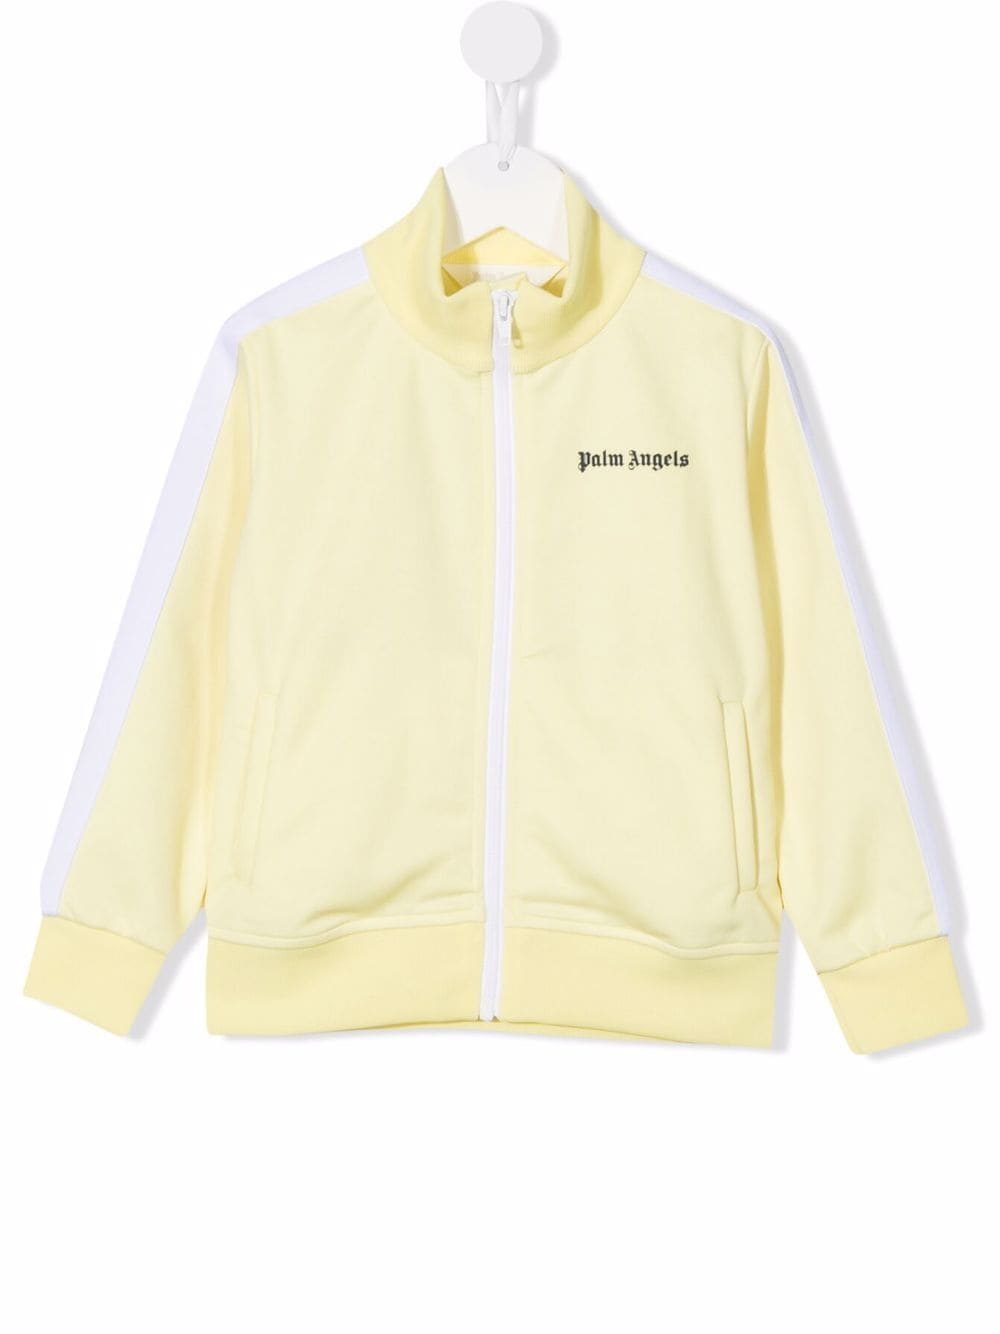 PALM ANGLES JUNIOR TRACKSUIT IN LIGHT YELLOW